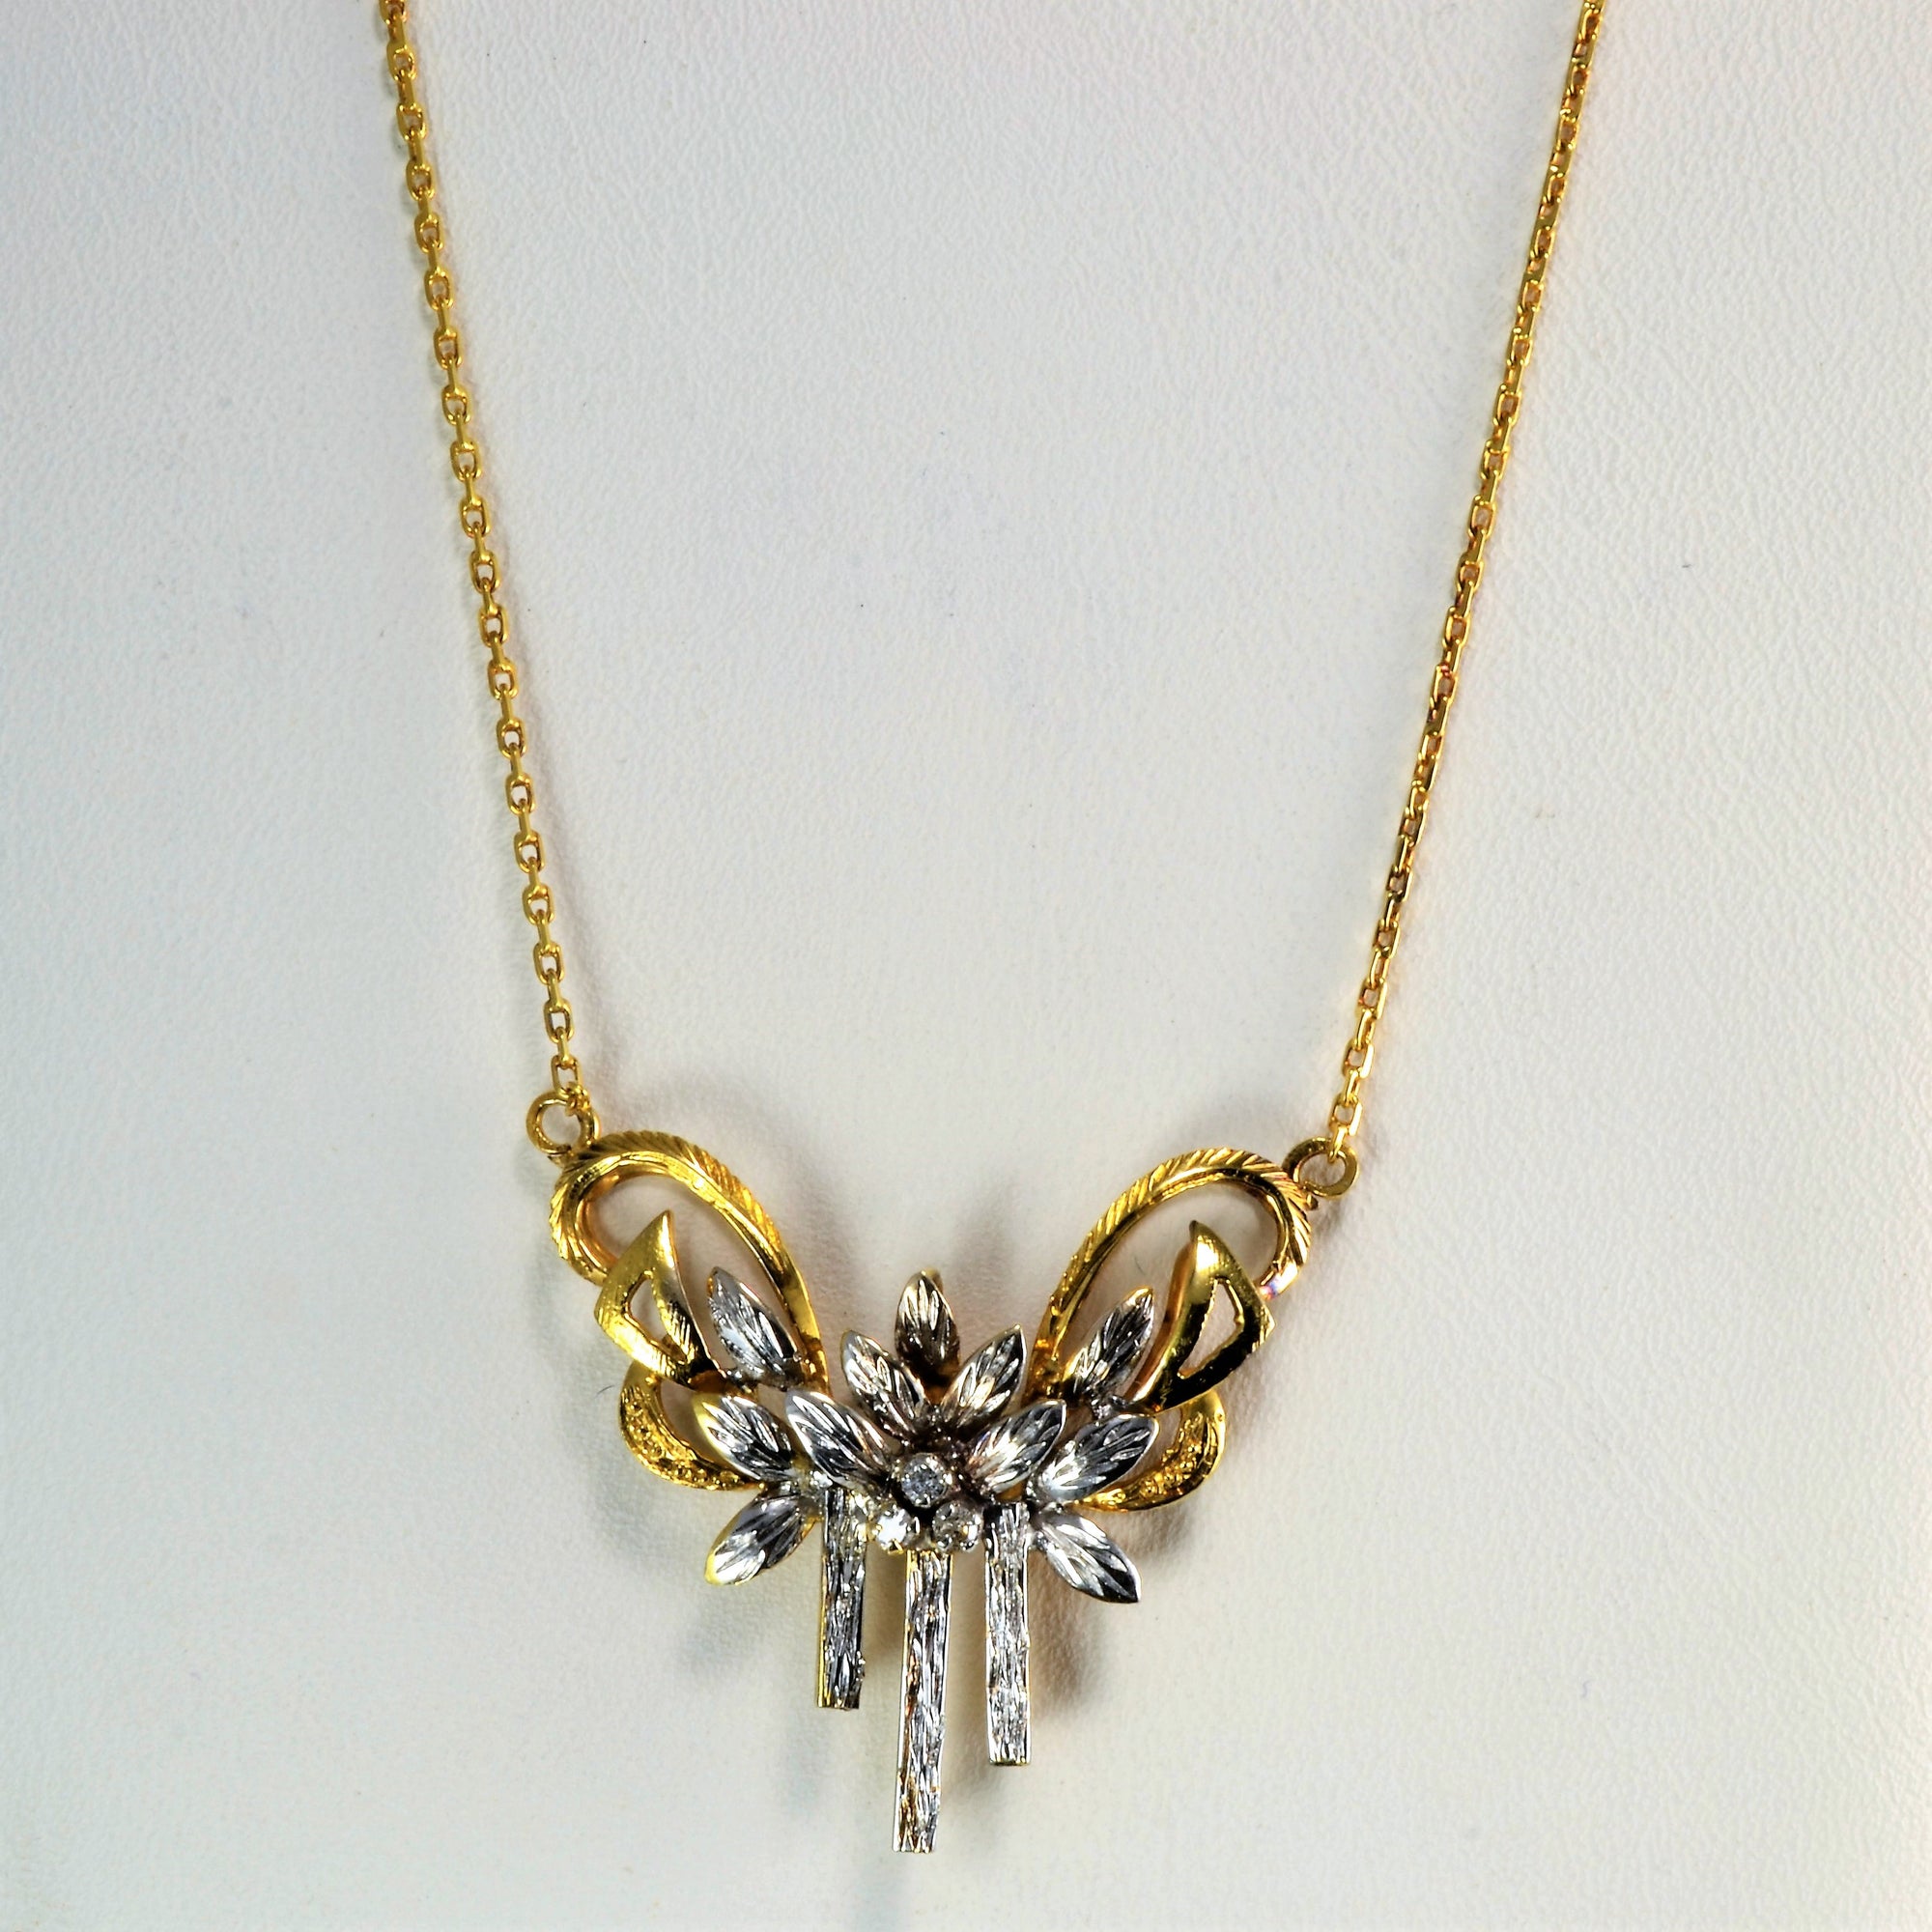 Floral Inspired Two Tone Gold Diamond Necklace | 0.03 ctw, 16''|